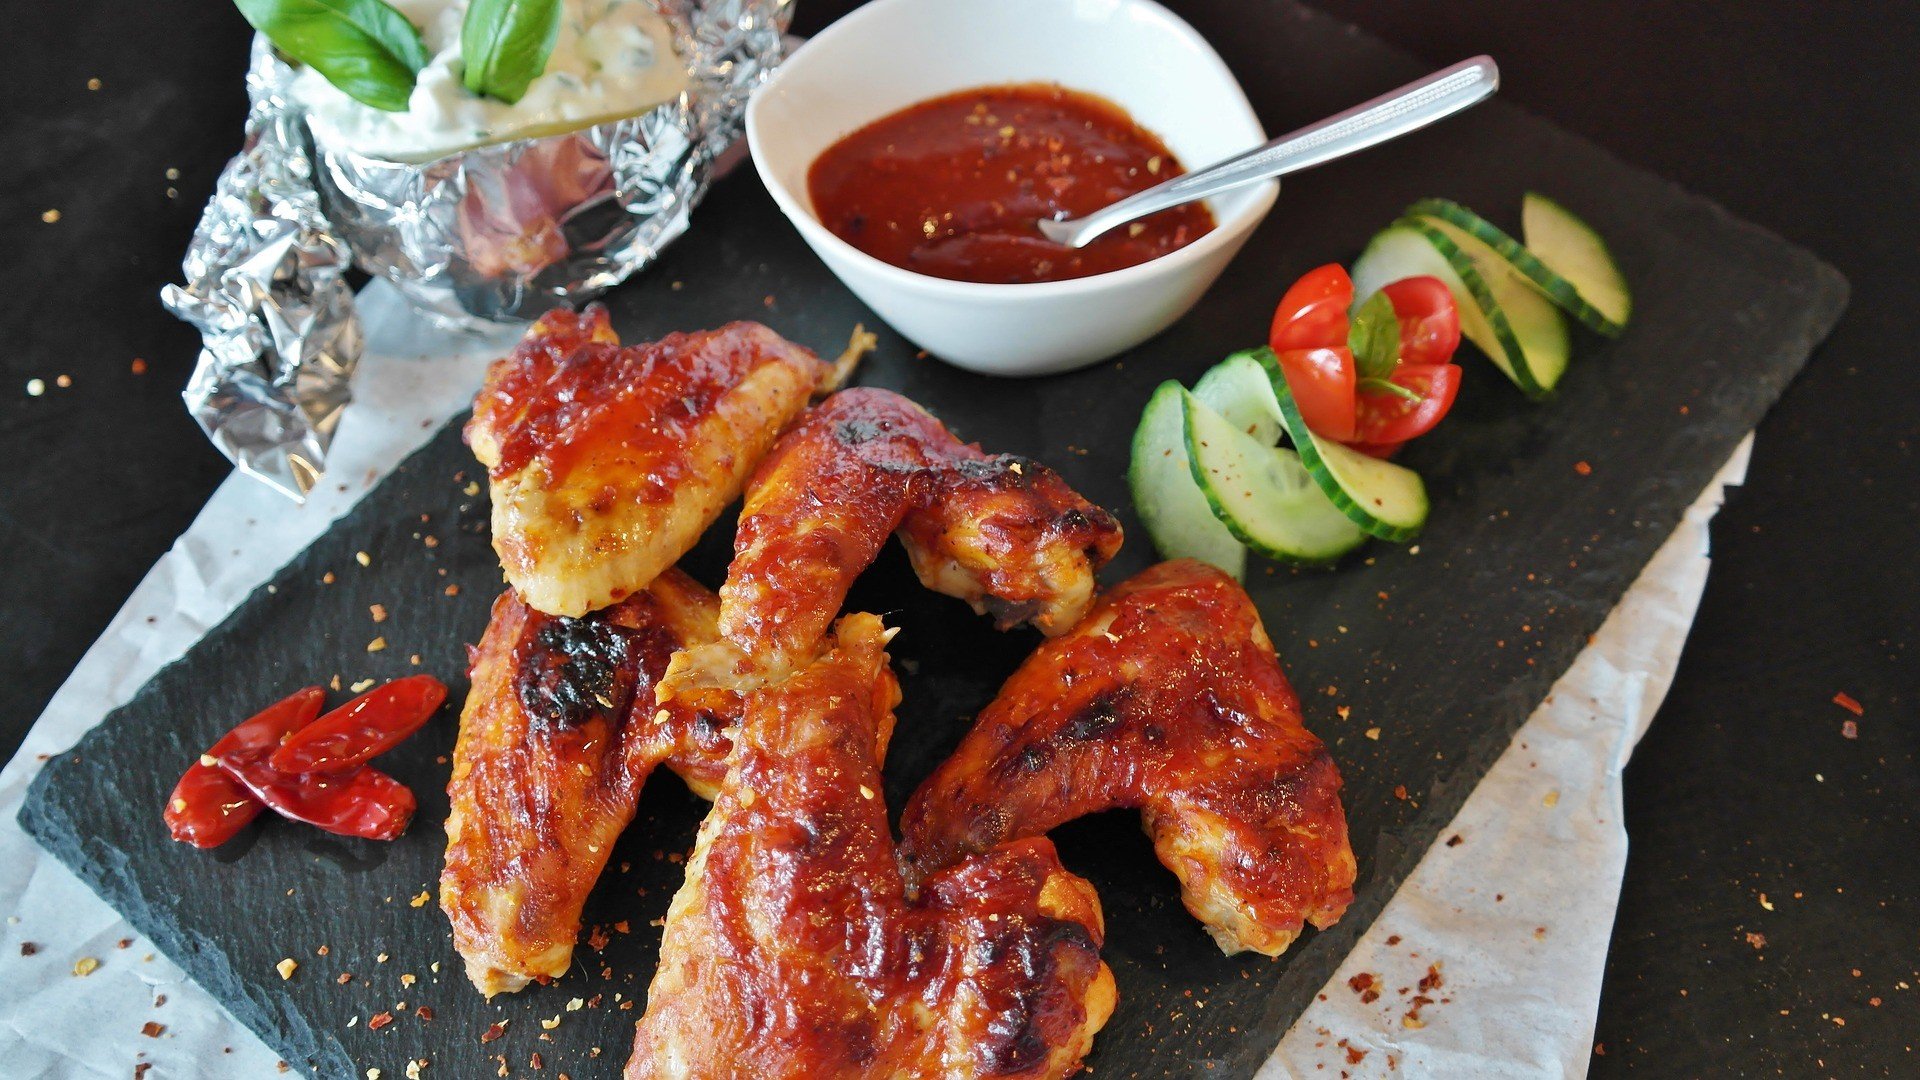 You are currently viewing Helvetic-Barbeque – “Original” Sauce & Wings